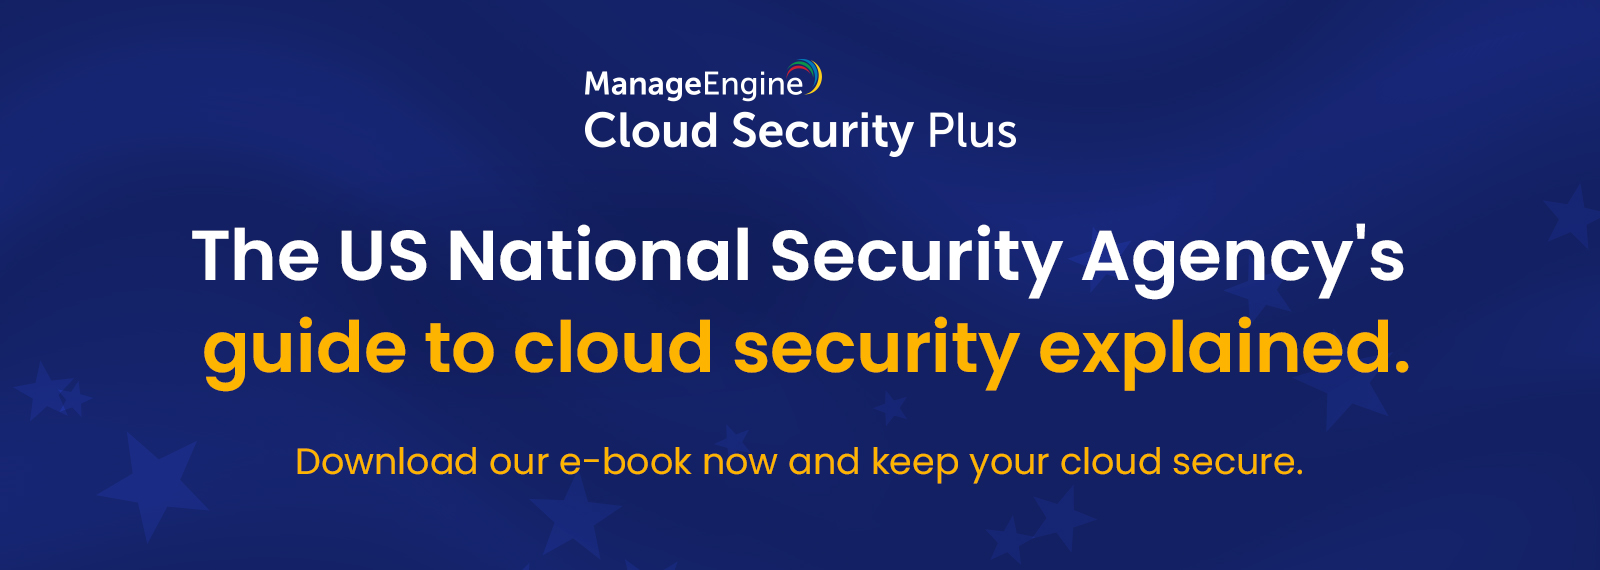 The US National Security Agency’s best practices for securing your cloud environment